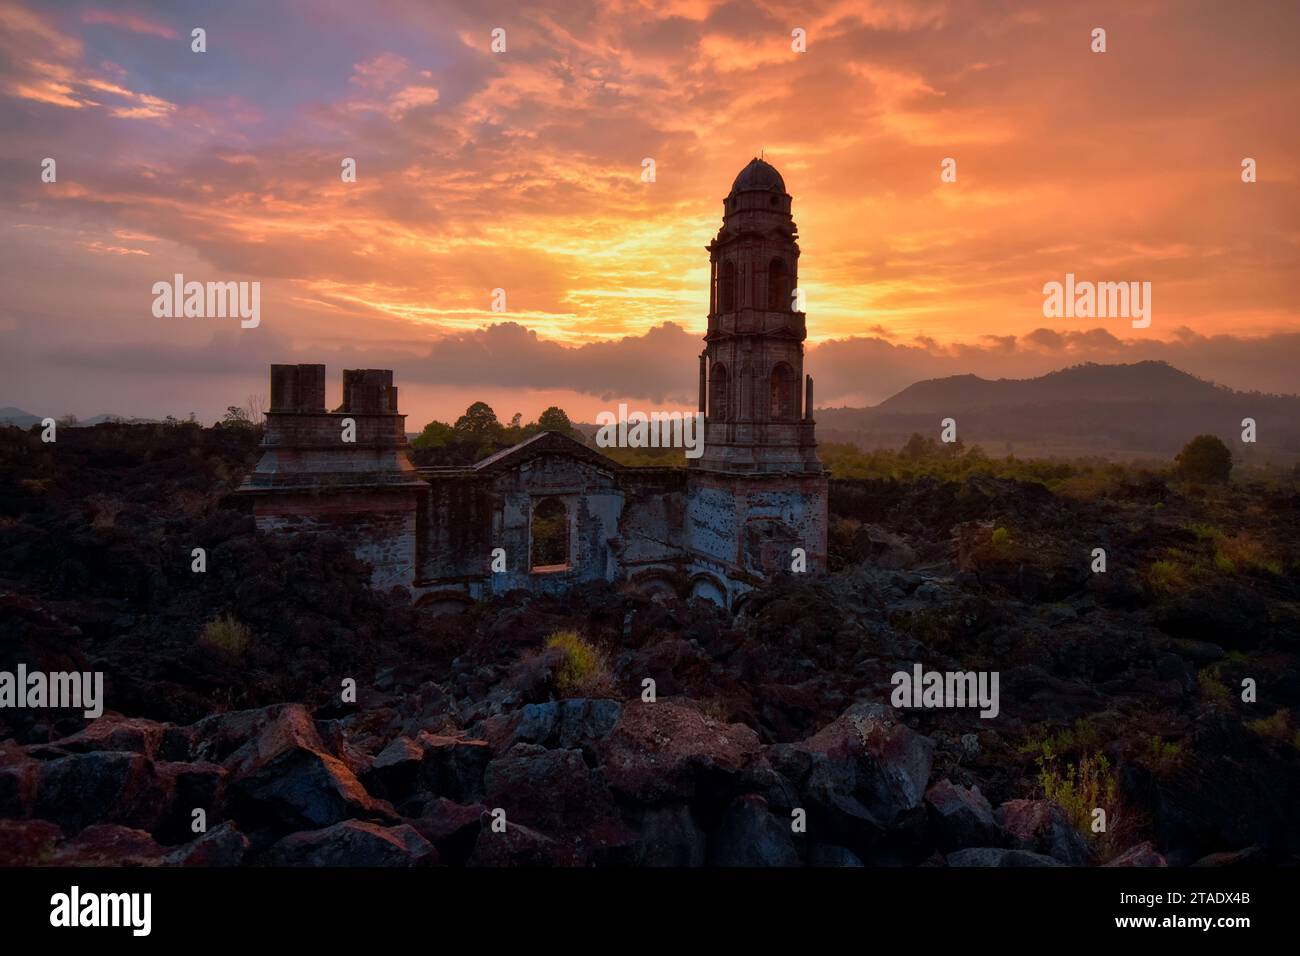 A Sunset at the ruins of the temple of San Juan Parangaricutiro, destroyed by the eruption of the Paricutin Volcano, Mexico Stock Photo